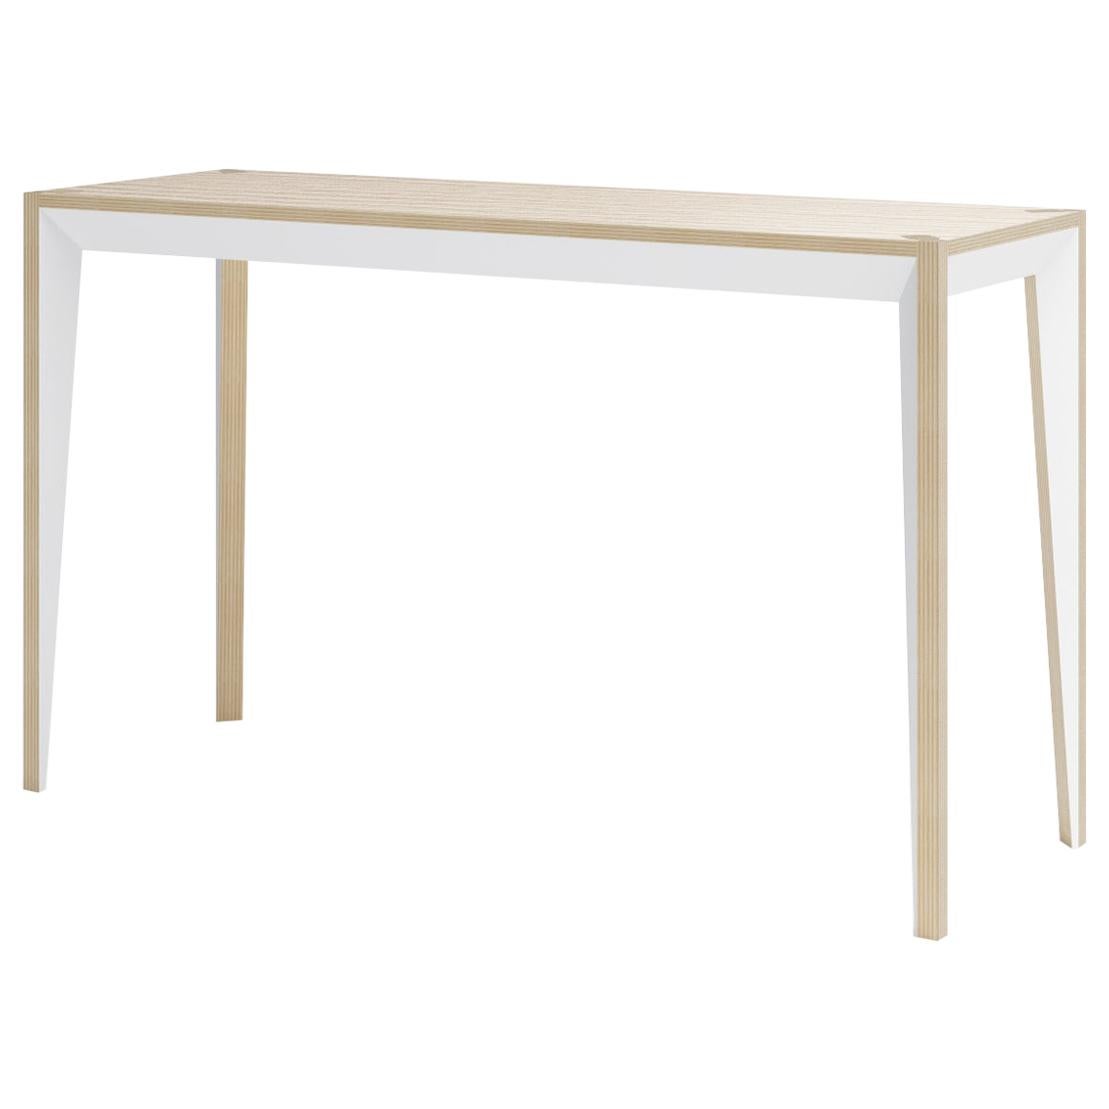 Oak Wood MiMi Console Table White by Miduny, Made in Italy